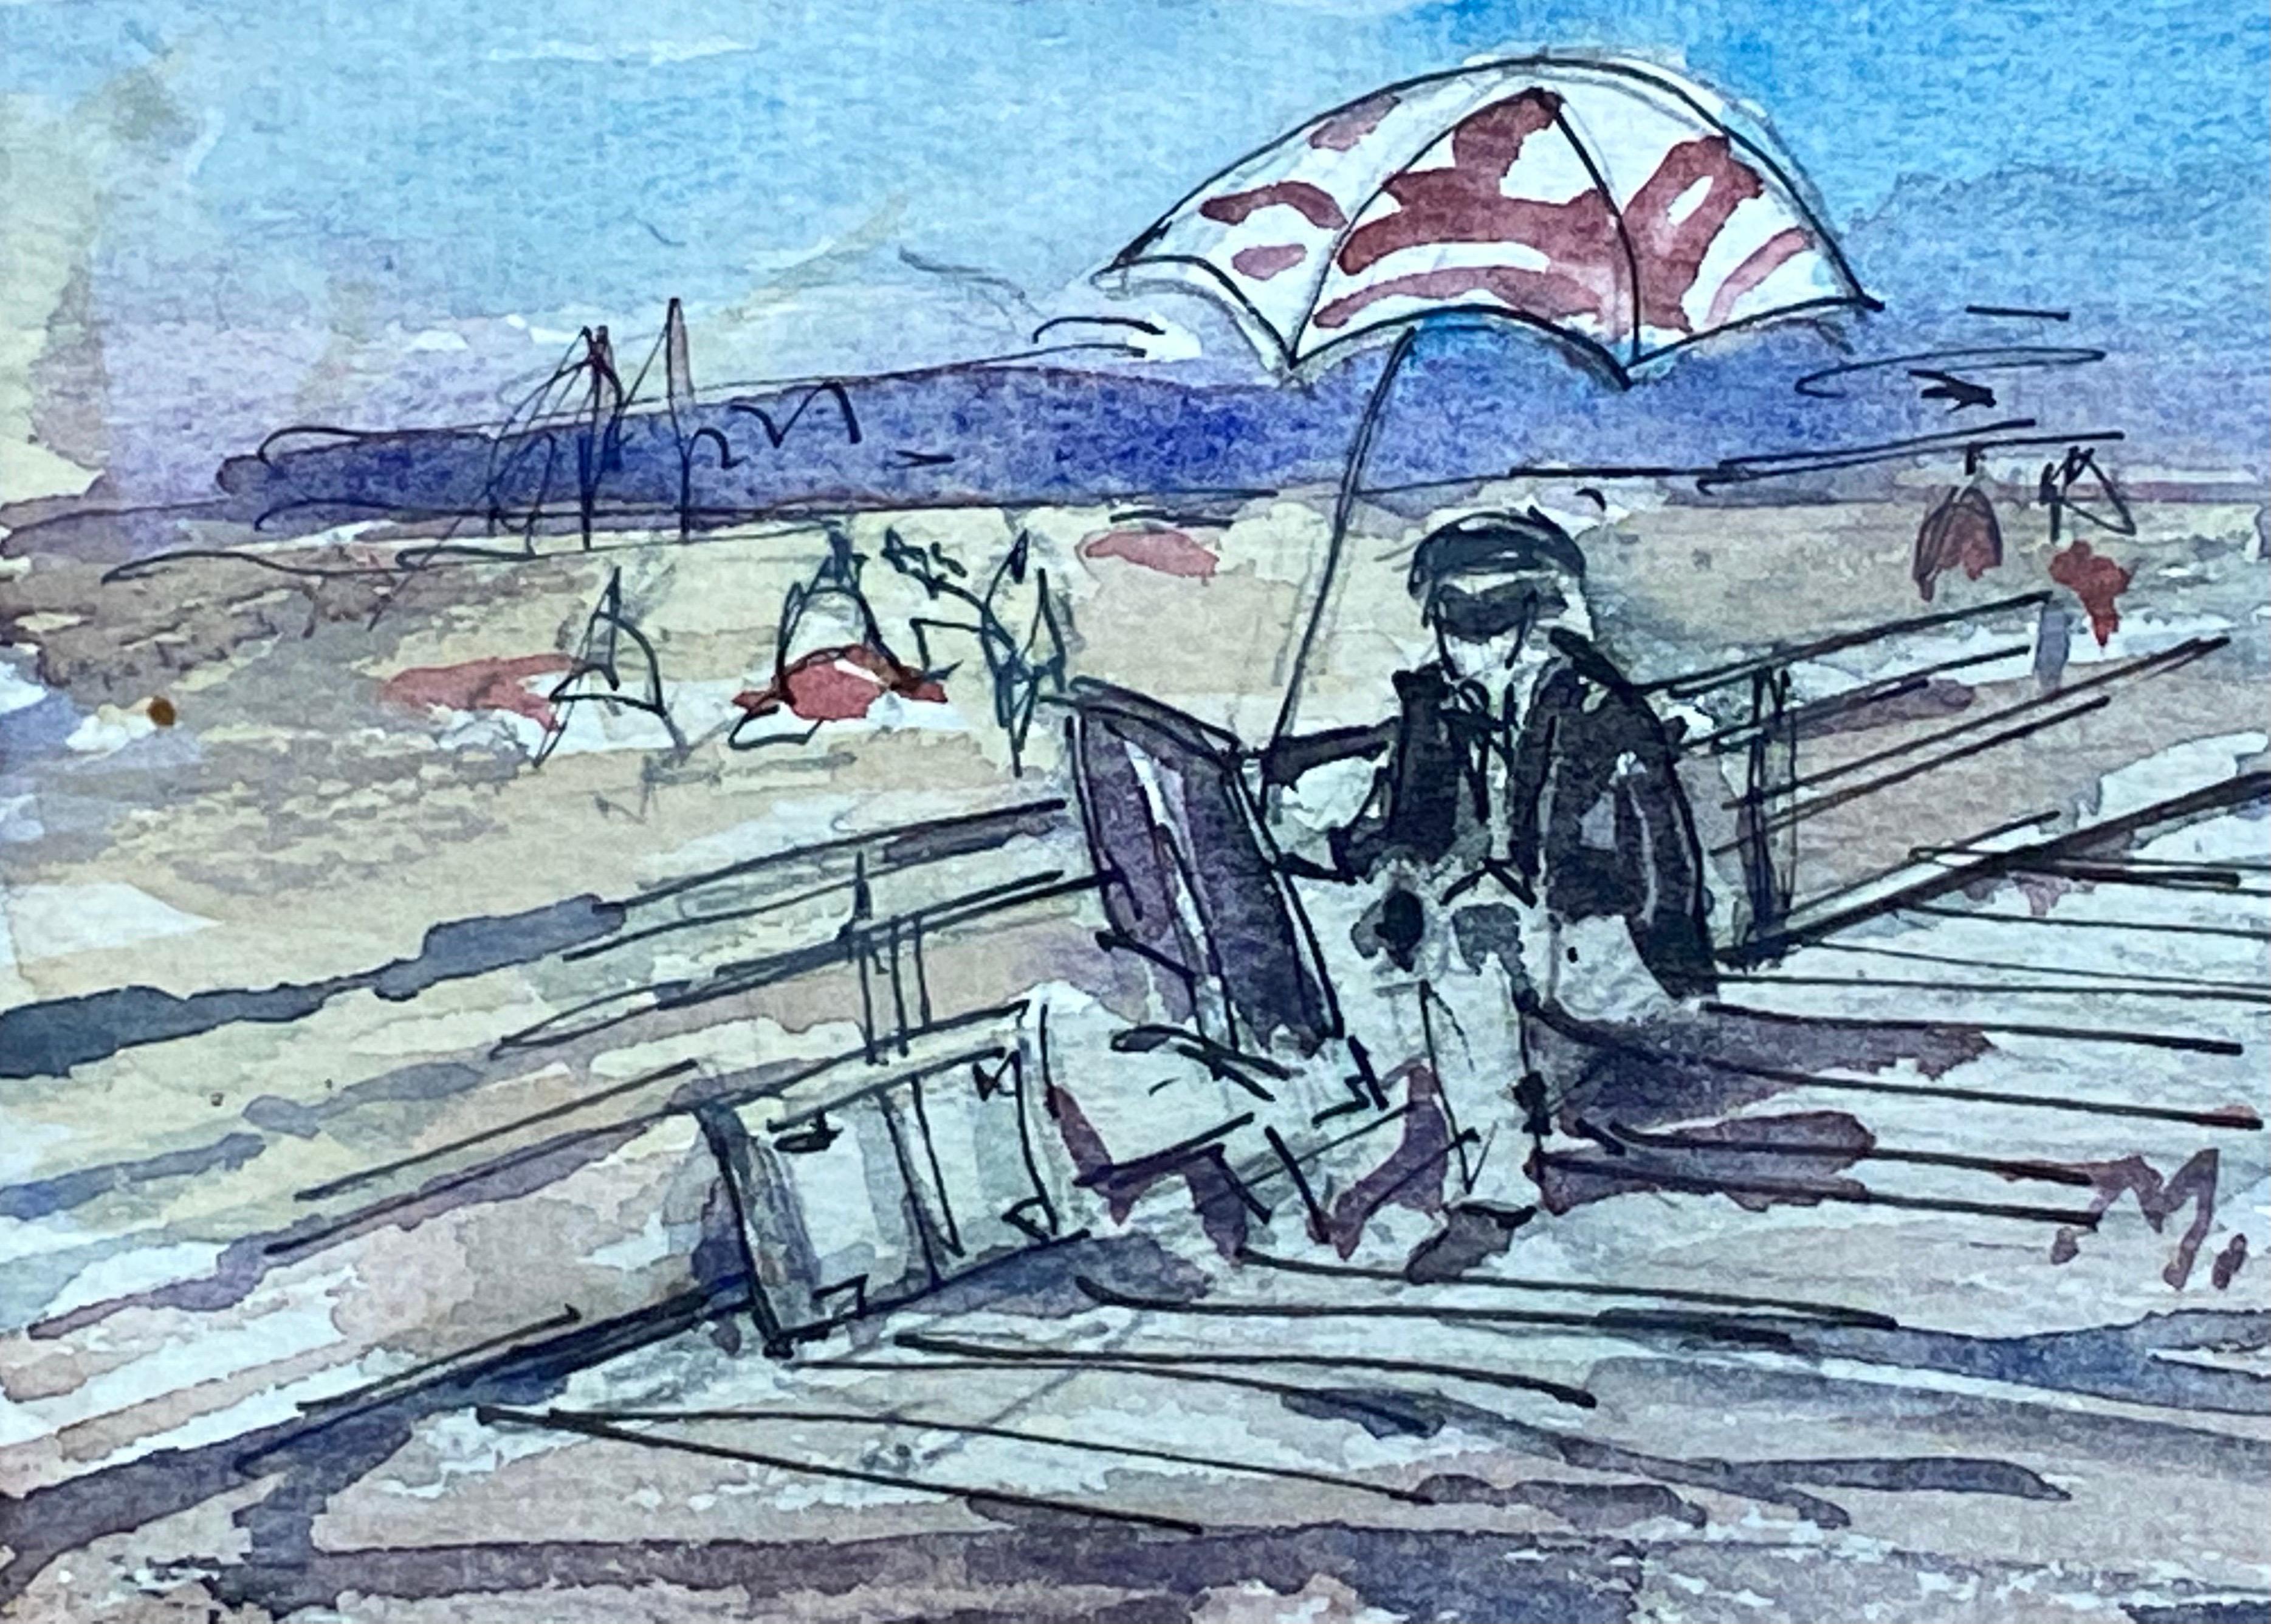 ARTIST AT EASEL PAINTING ON THE BEACH - FRENCH IMPRESSIONIST WATERCOLOR